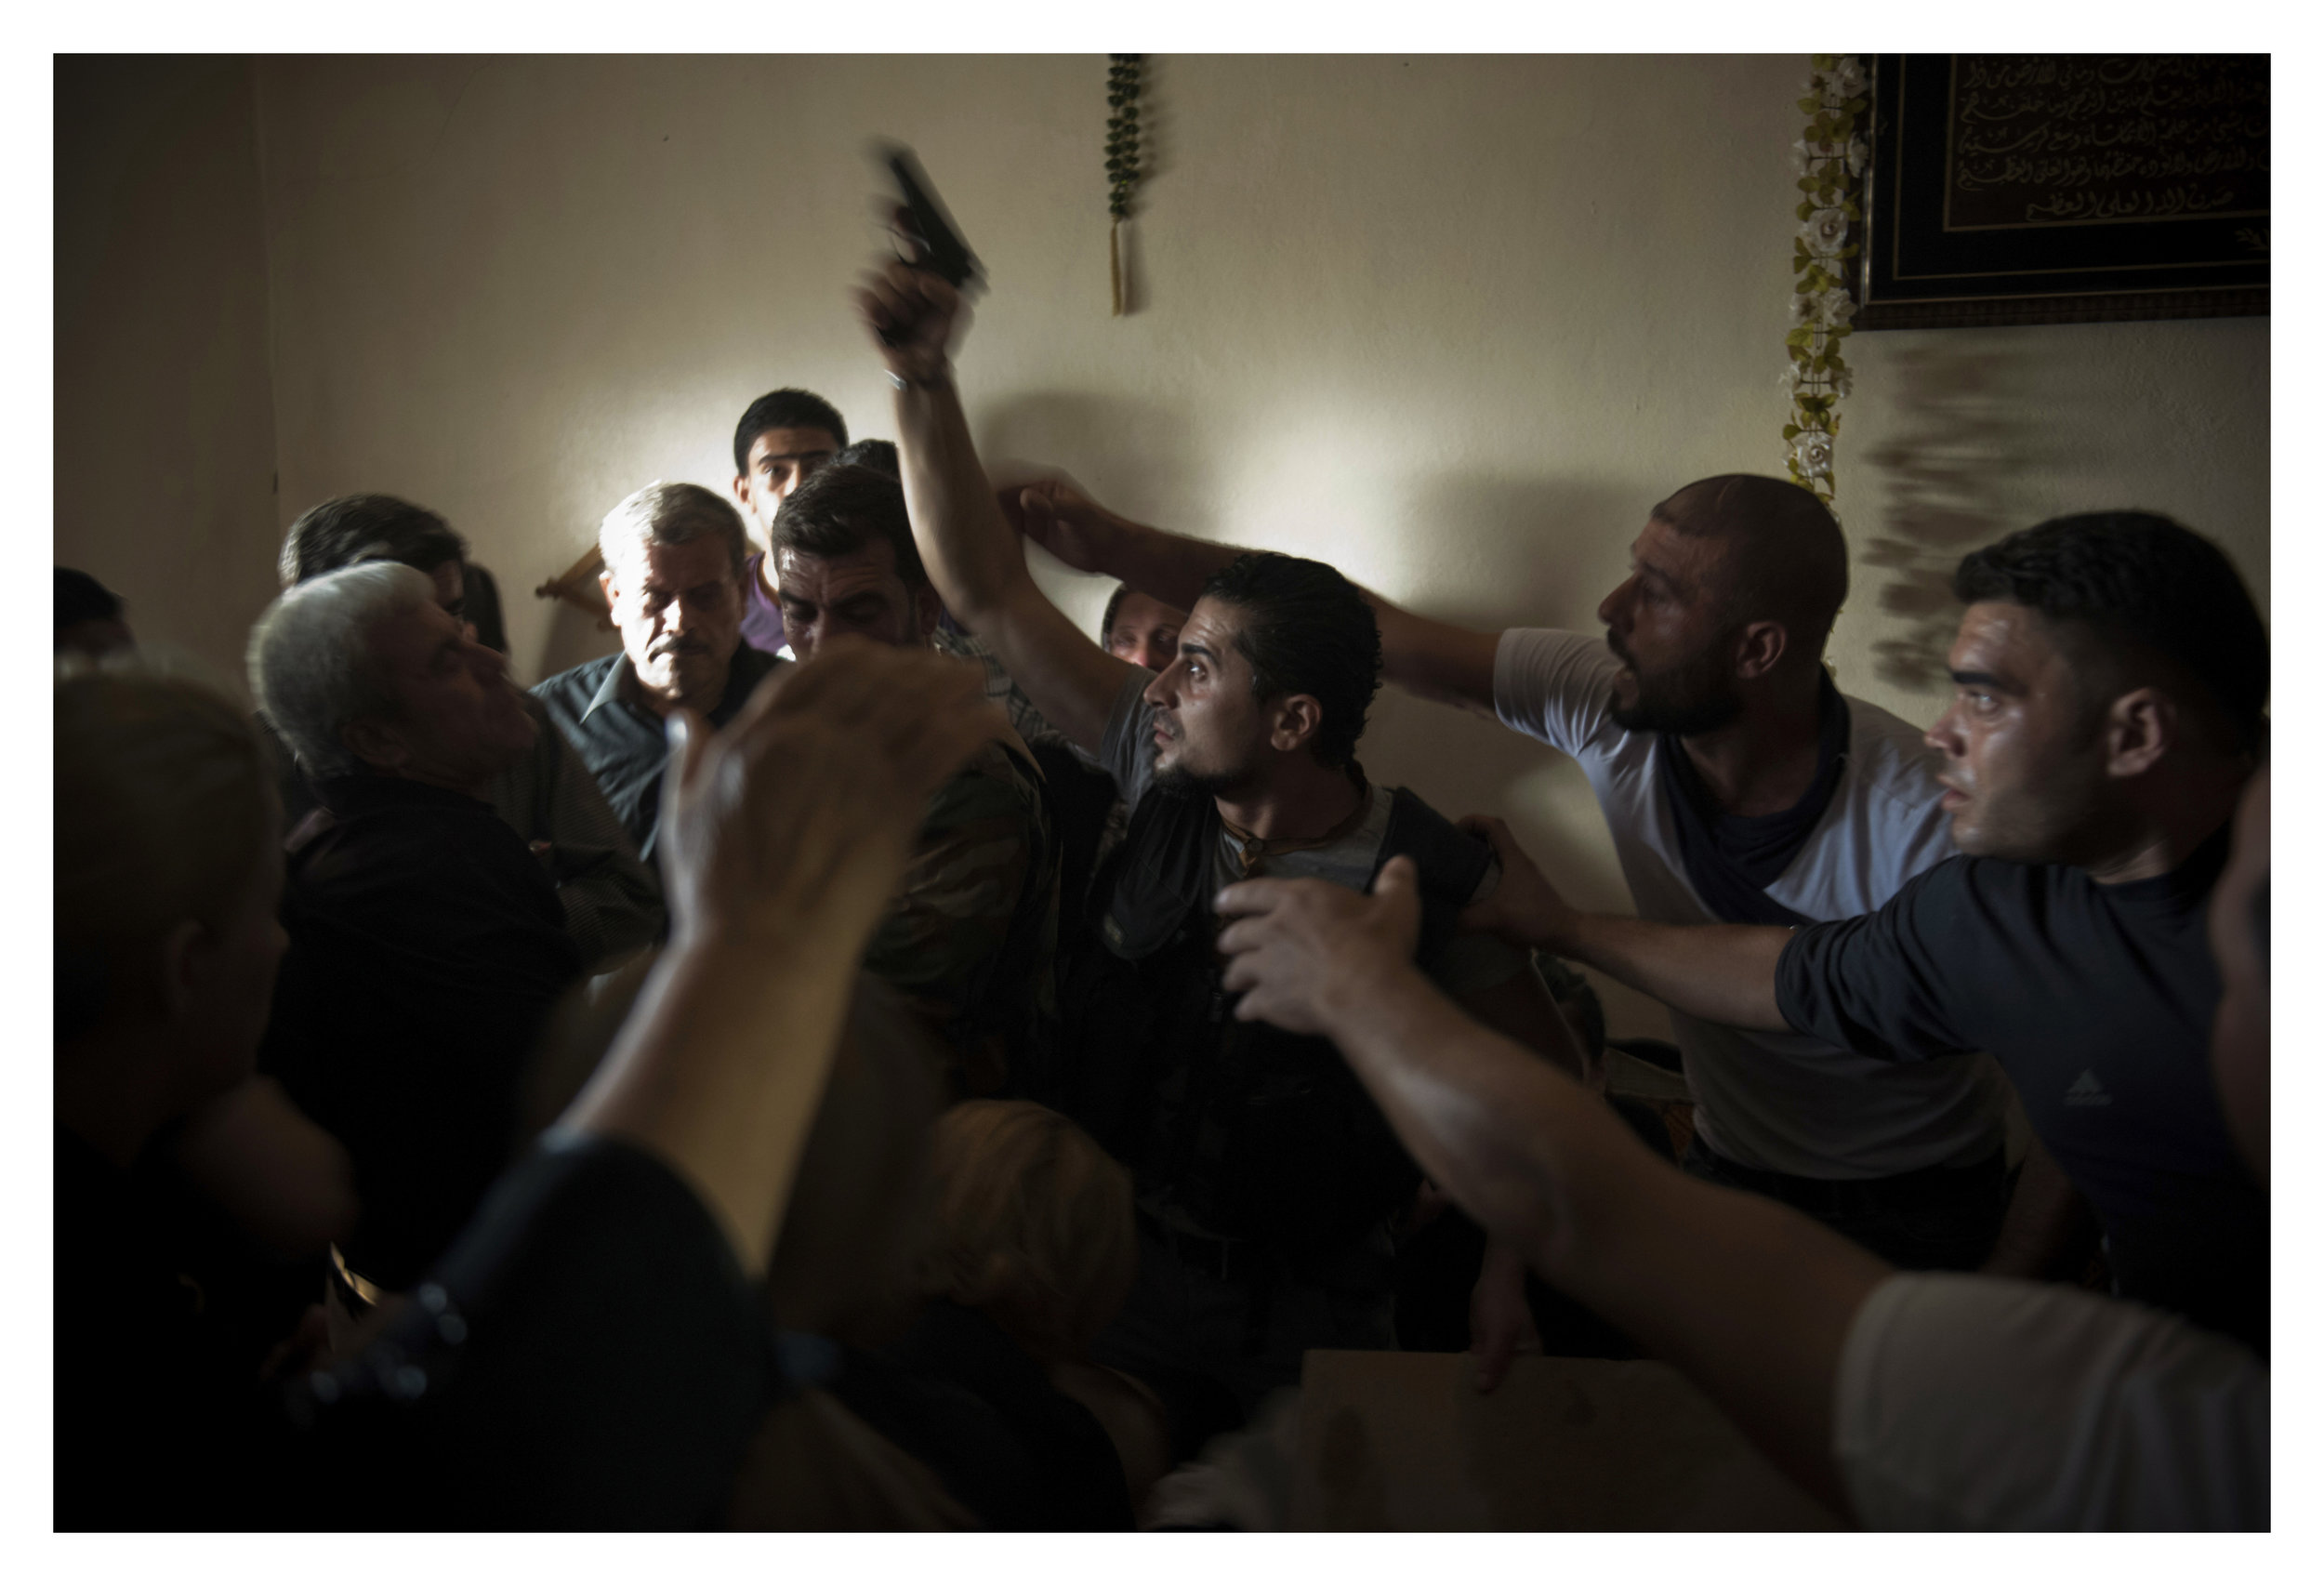  Bassel Barhoum (center) yells angrily after looking inside his brother's casket at his funeral in the village of Daqaqa in Latakia Province, Syria. Abu Layth died while fighting as an officer in the Syrian Army. 